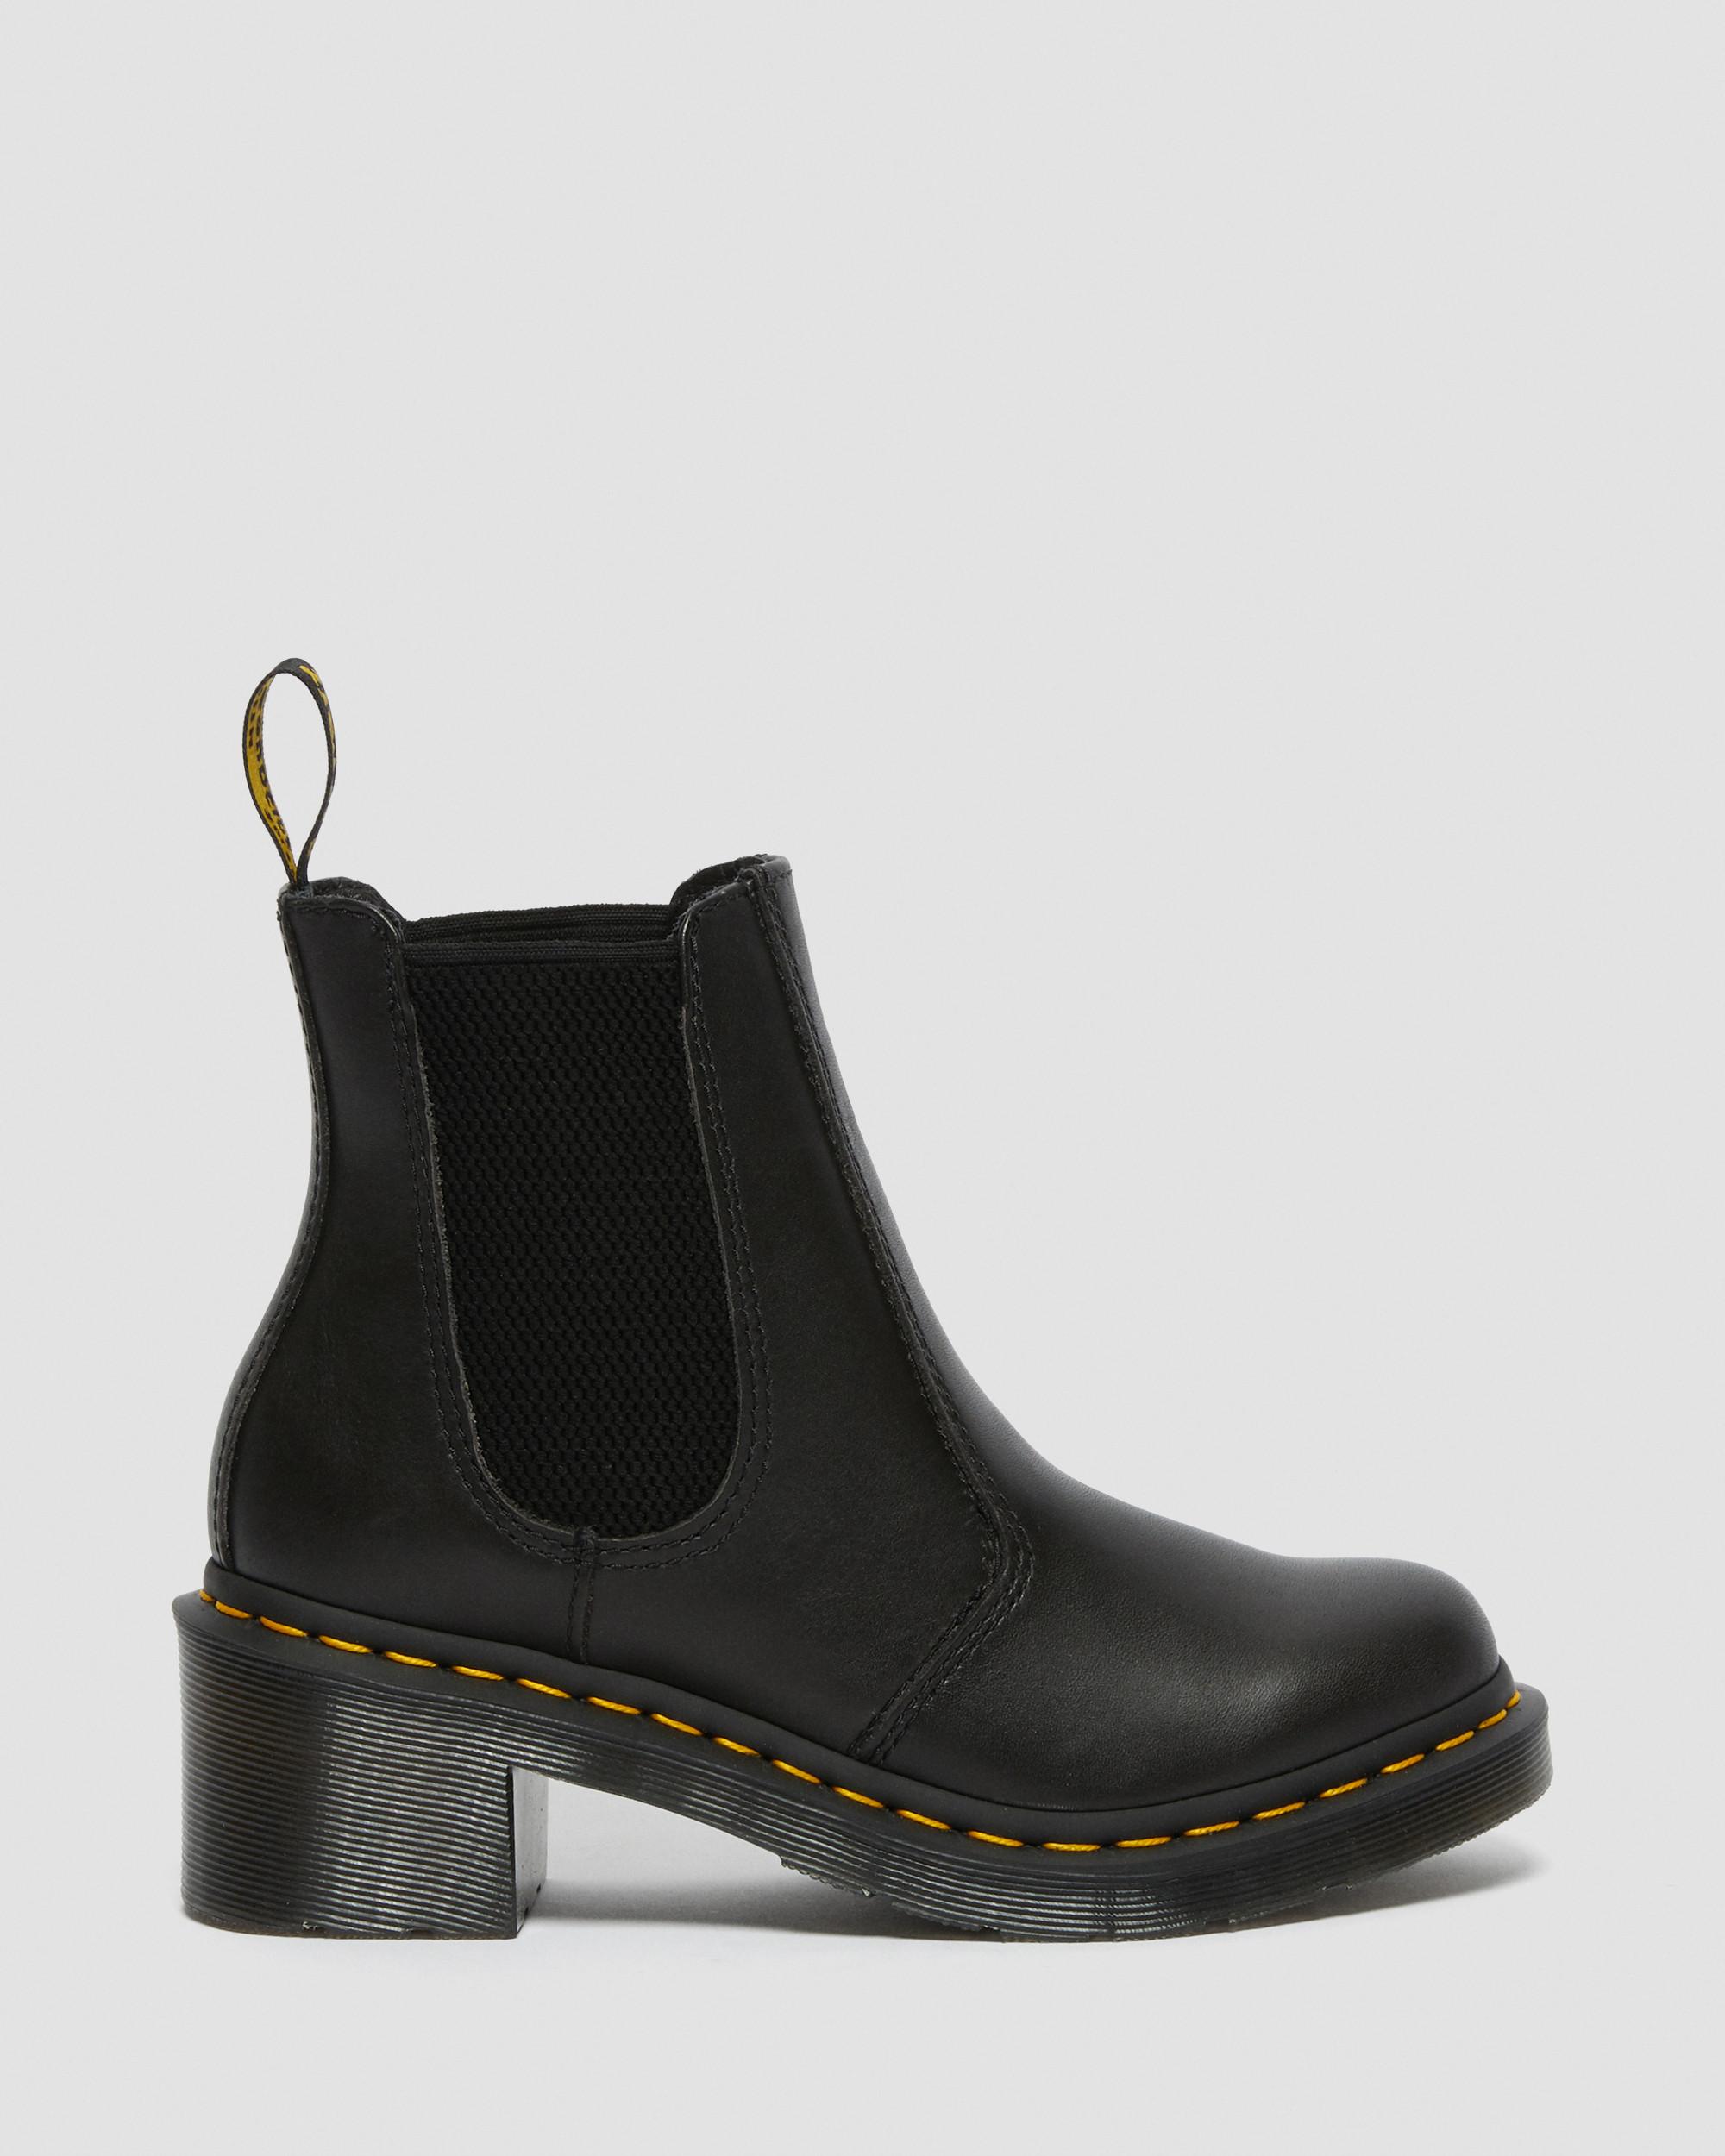 Cadence Women's Leather Heeled Chelsea Boots in Black | Dr. Martens